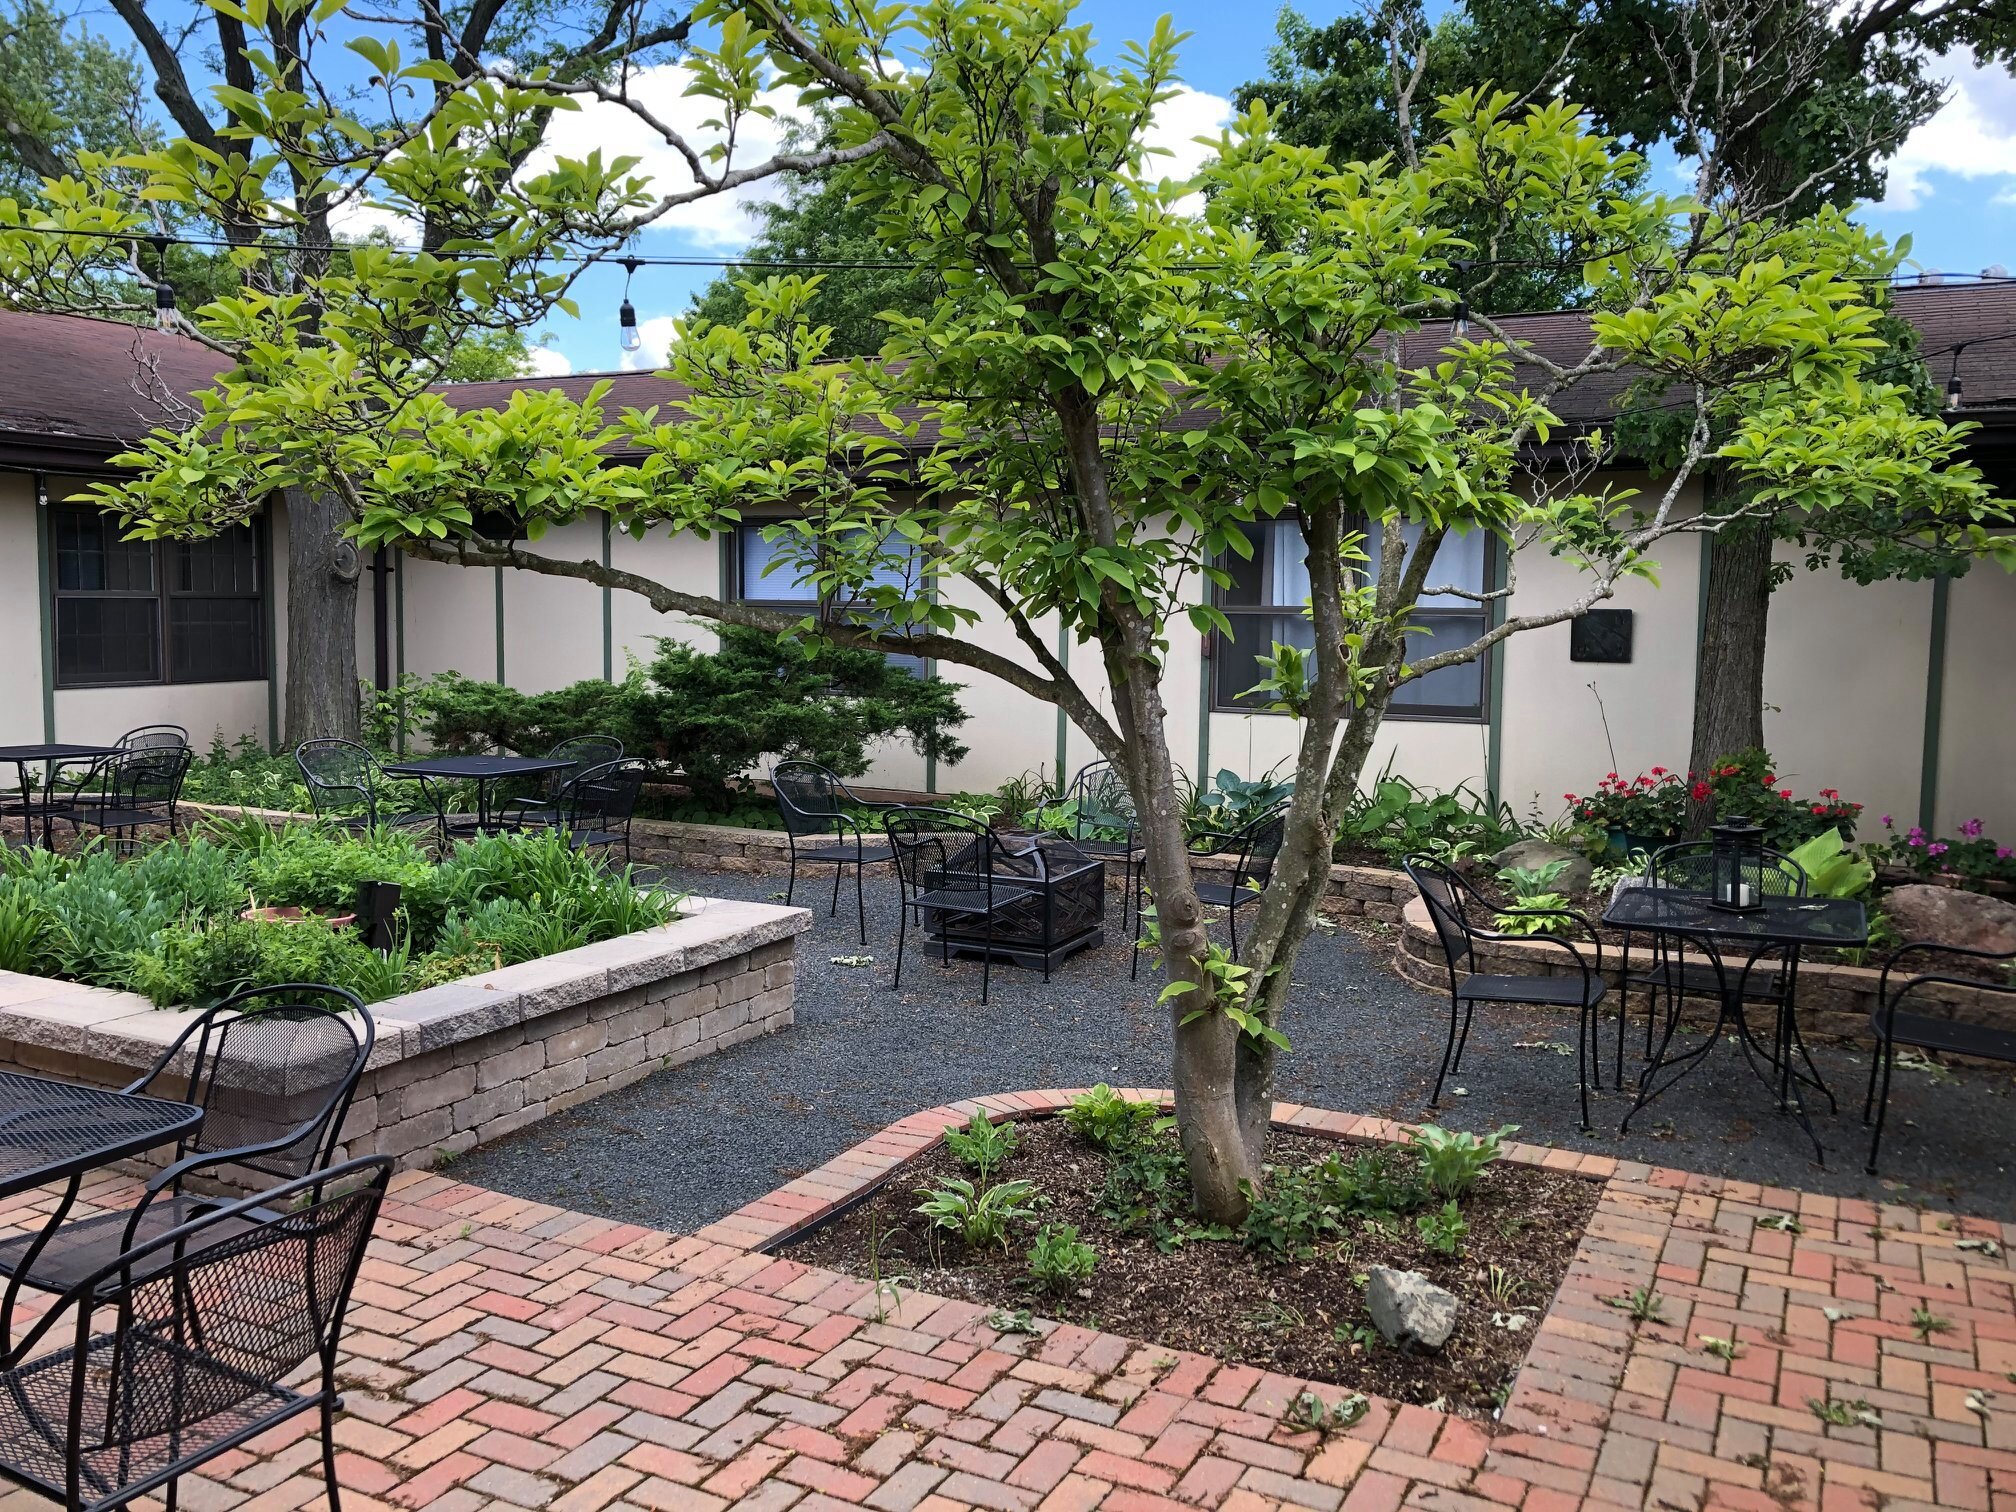 Community Center Court Yard - Perfect for Family or Community Gatherings